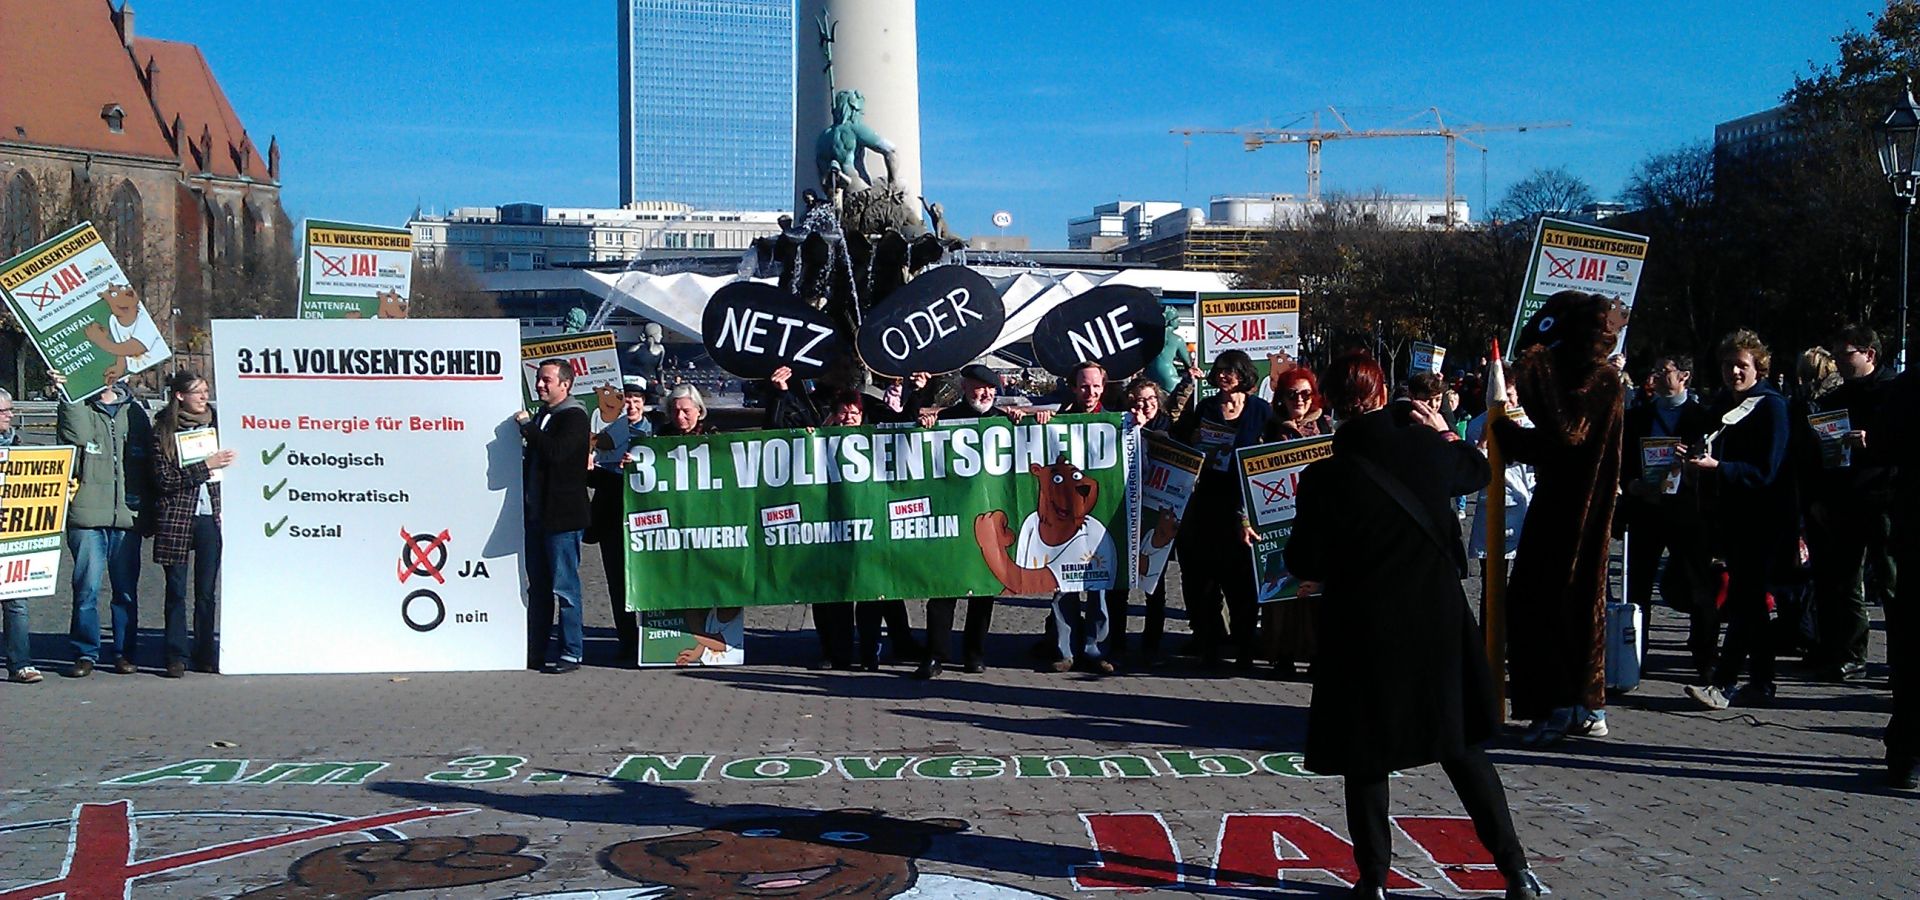 Gathering in front of the TV tower in Berlin, protesters with signs saying yes to new energy for Berlin